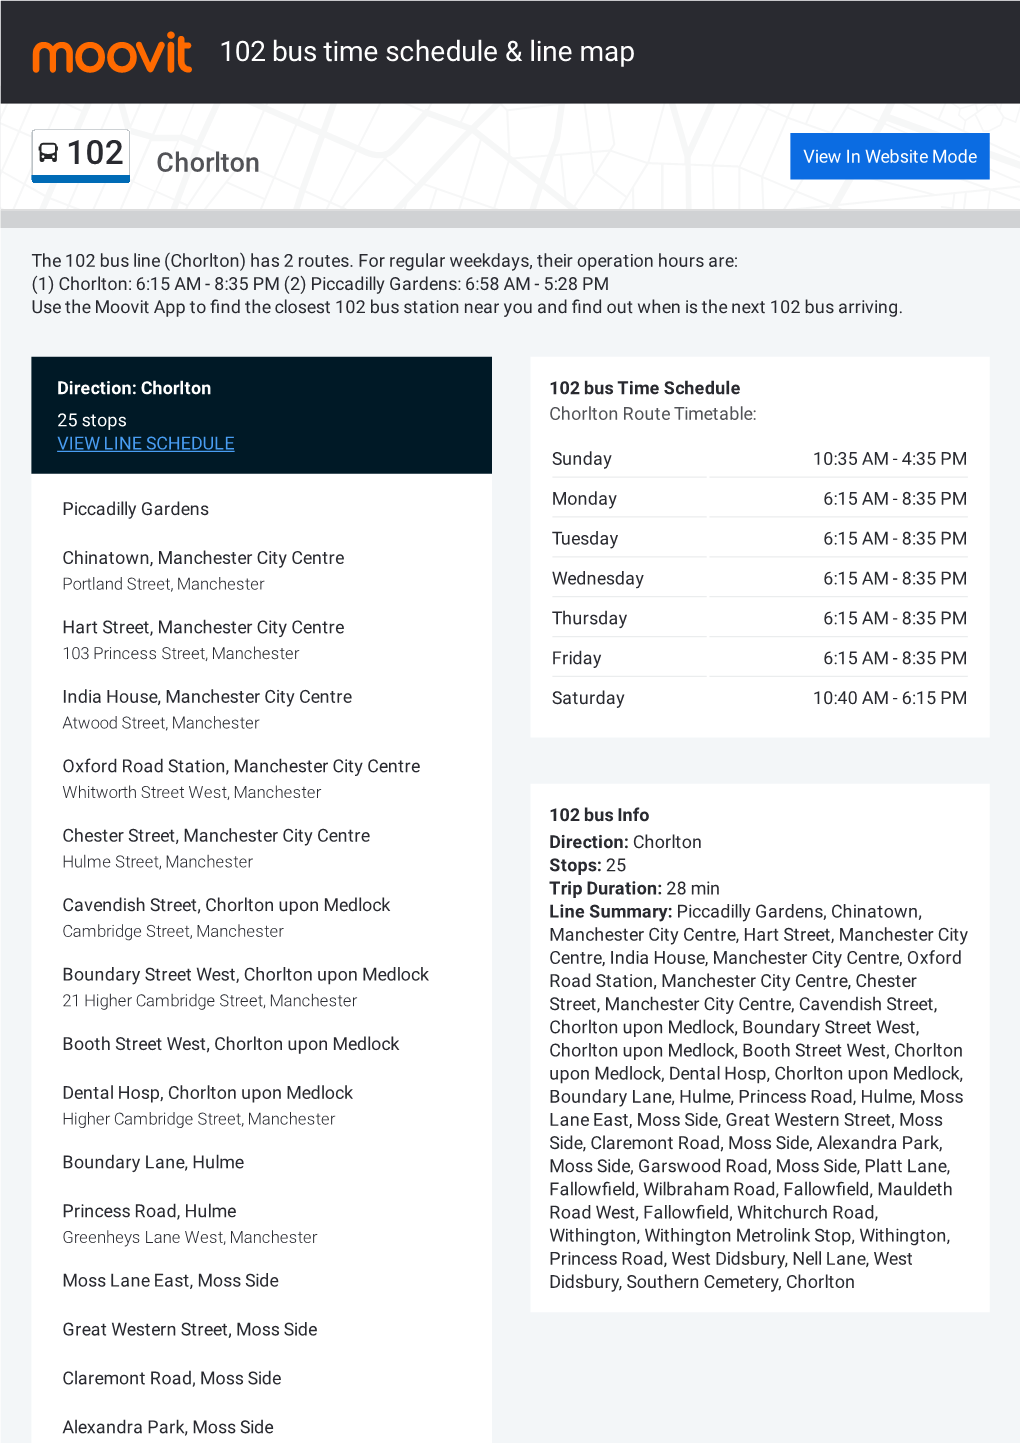 102 Bus Time Schedule & Line Route